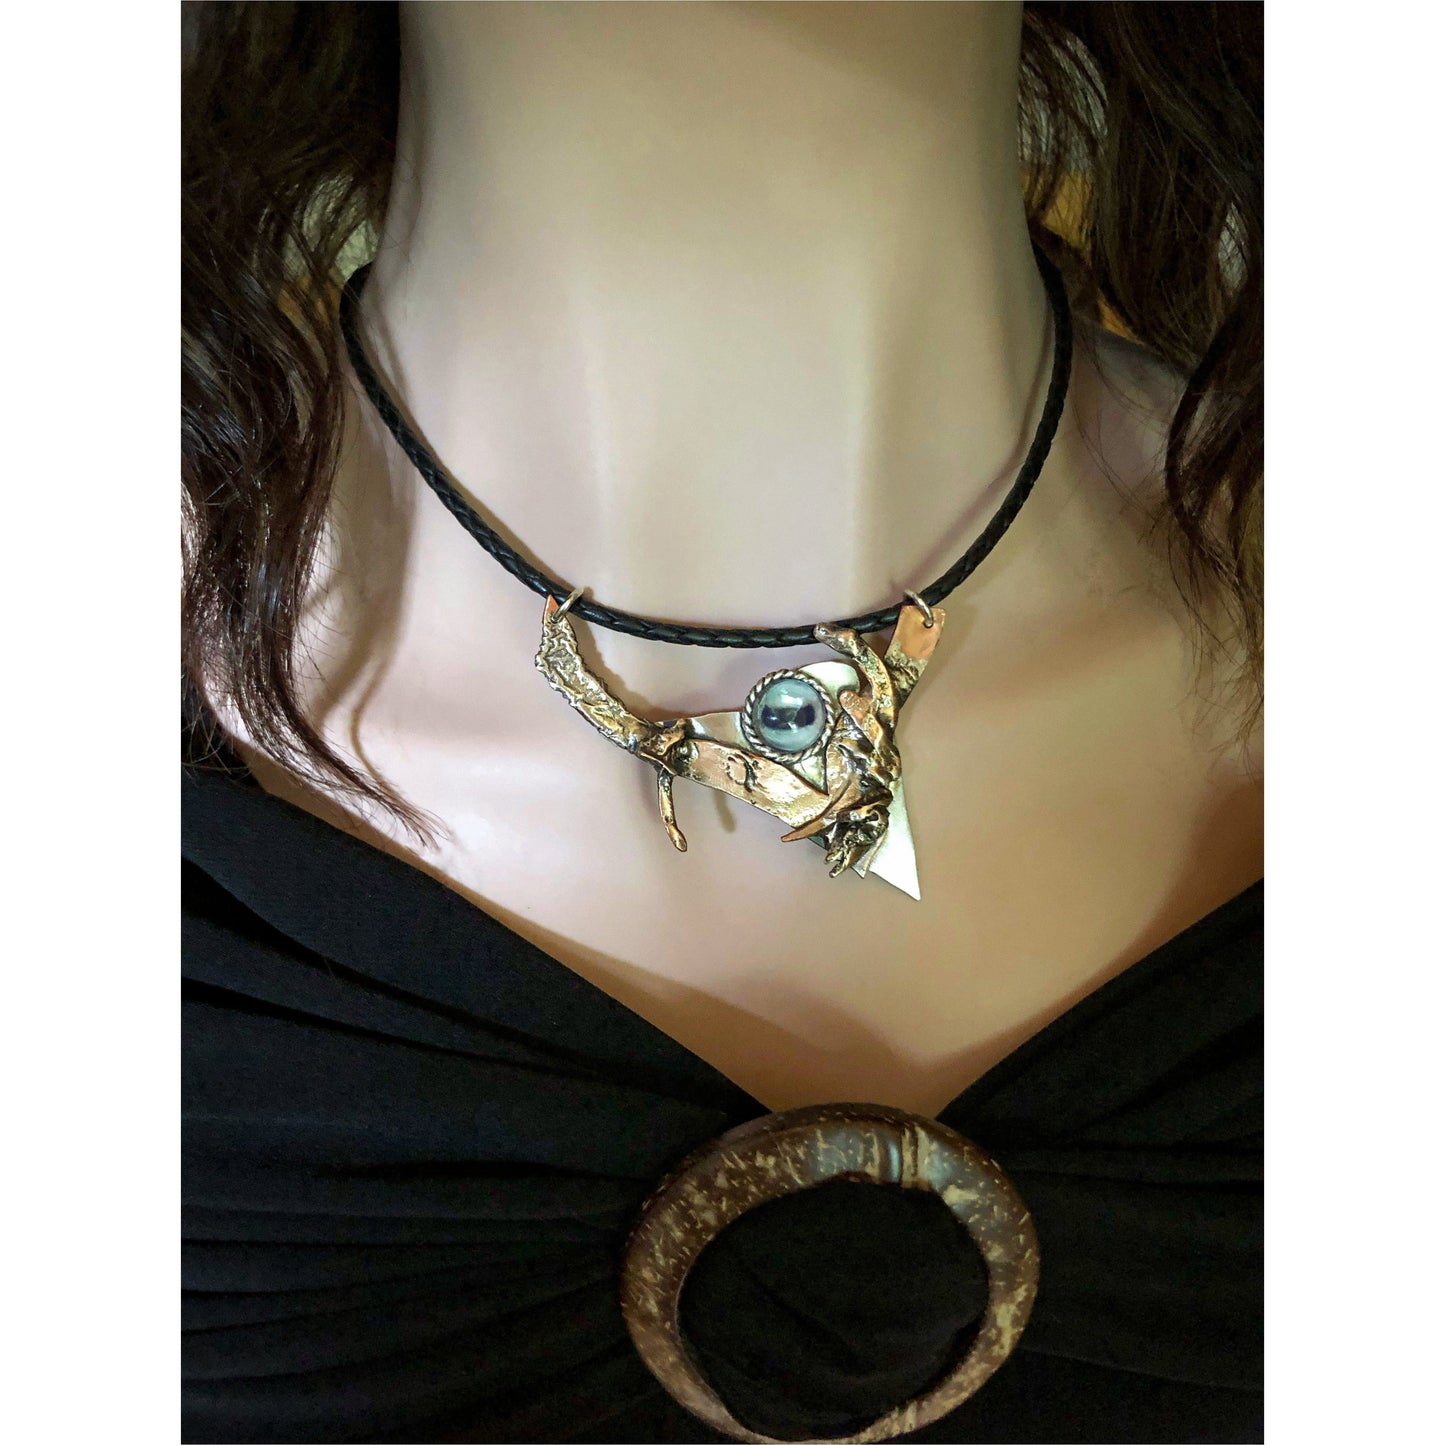 3 Tone Mixed Metal Brutalist Eye Necklace